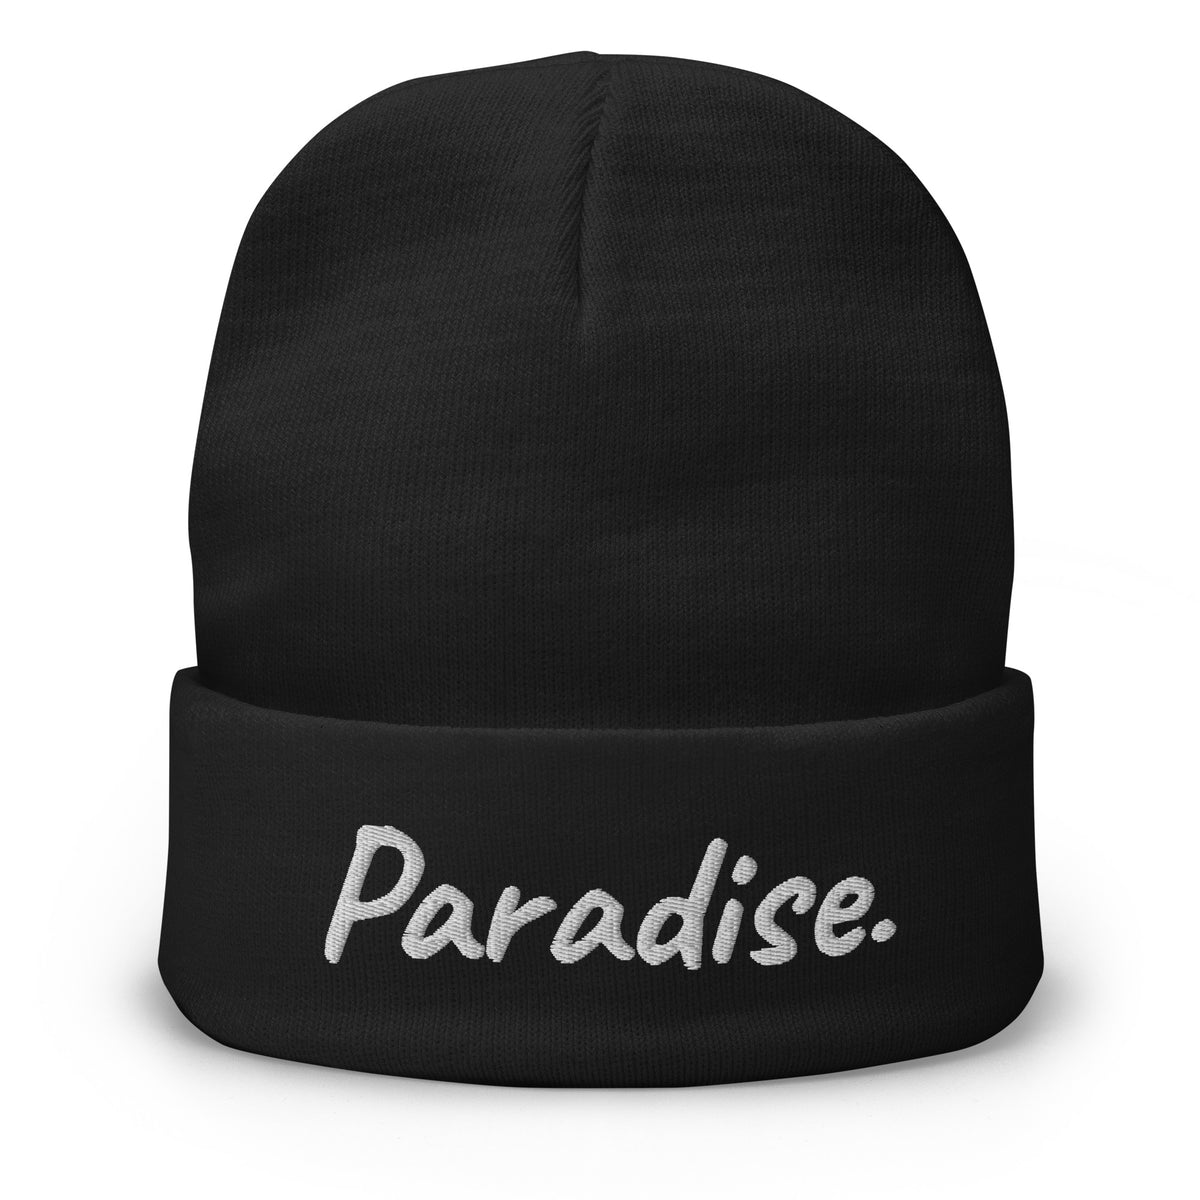 Paradise. - Embroidered Beanie